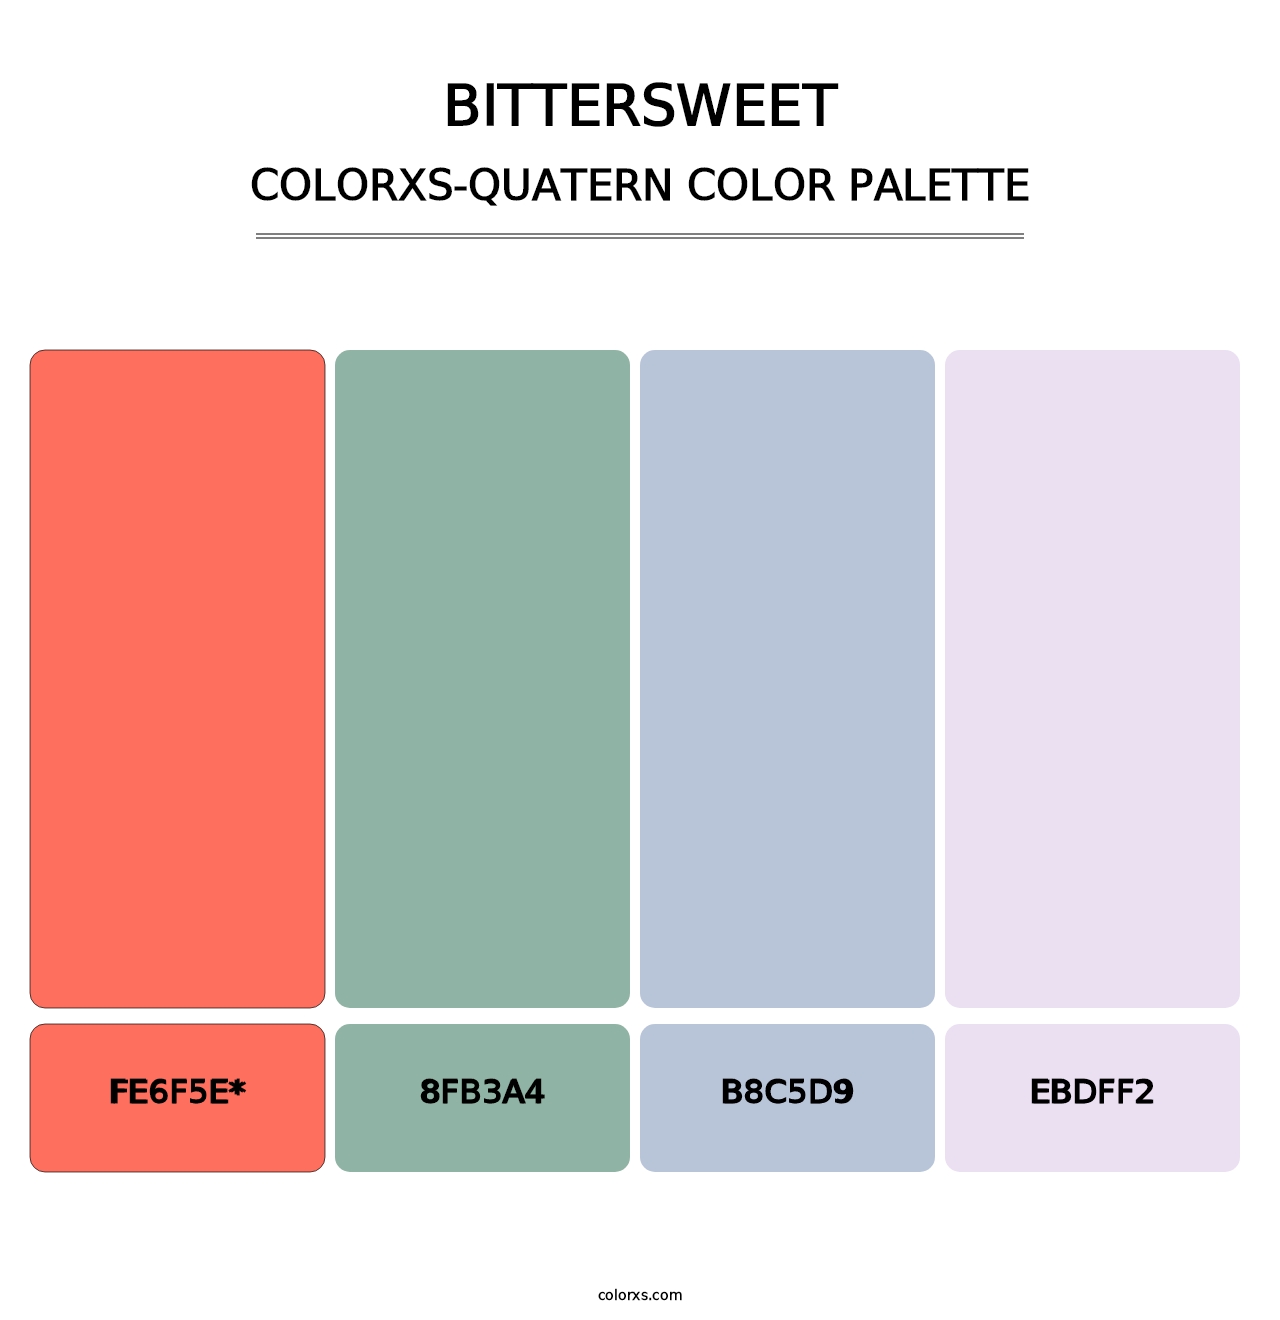 Bittersweet - Colorxs Quatern Palette